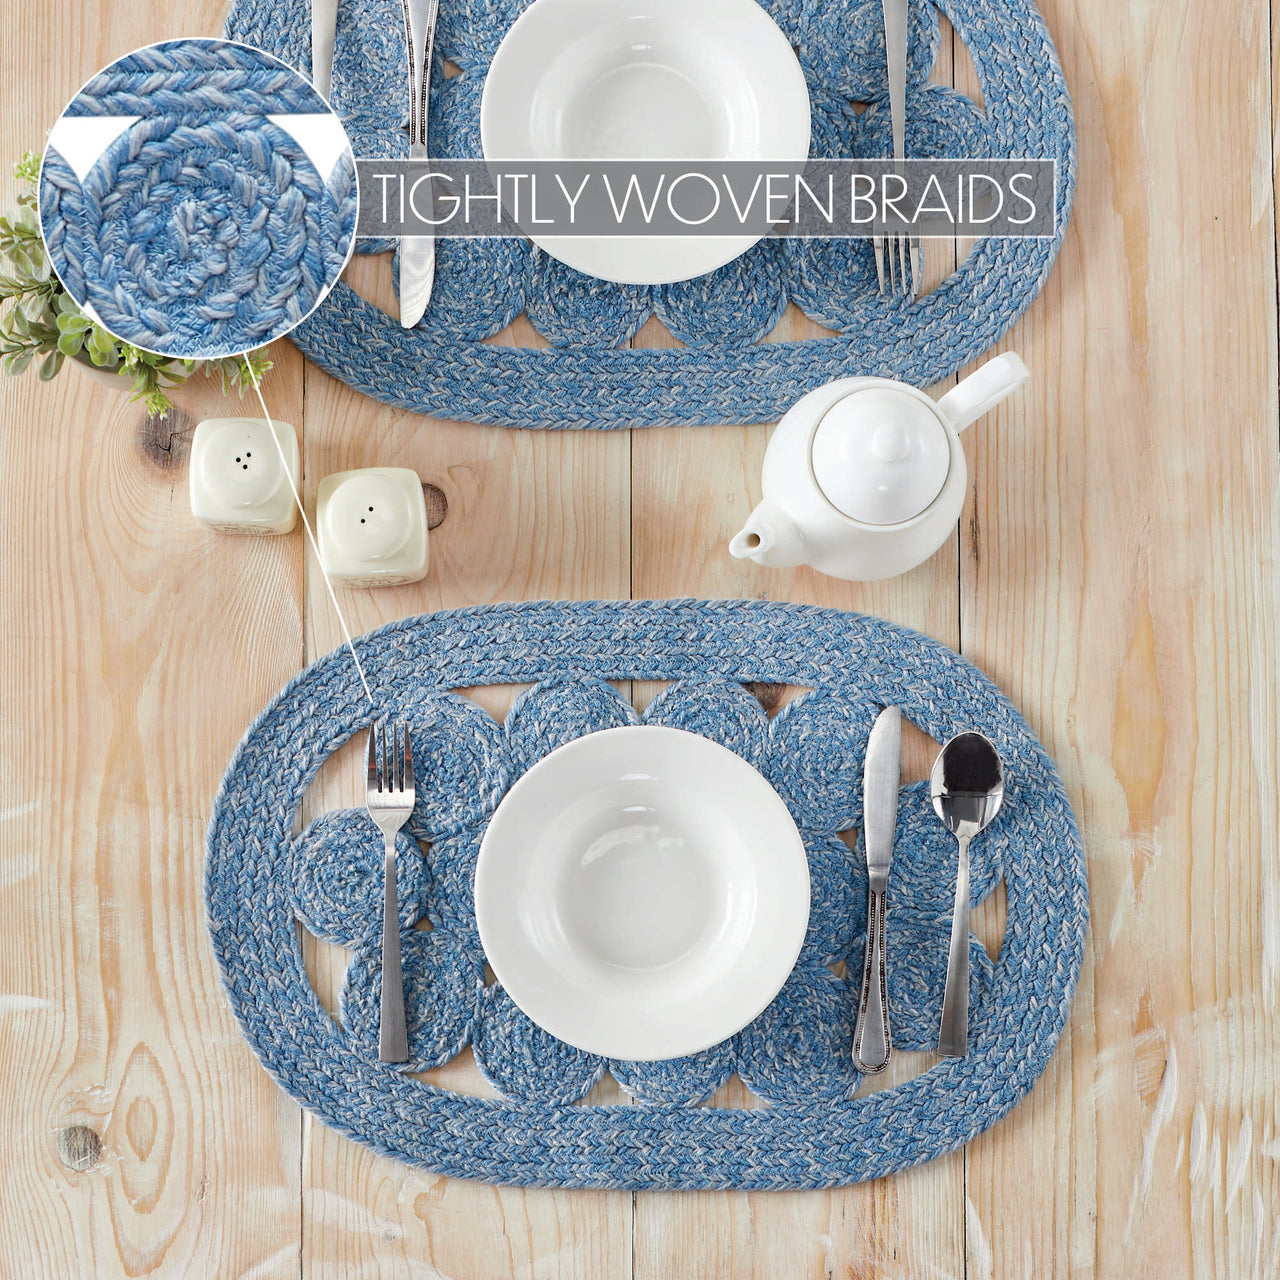 Celeste Blended Blue Indoor/Outdoor Braided Placemat 13"x19" VHC Brands